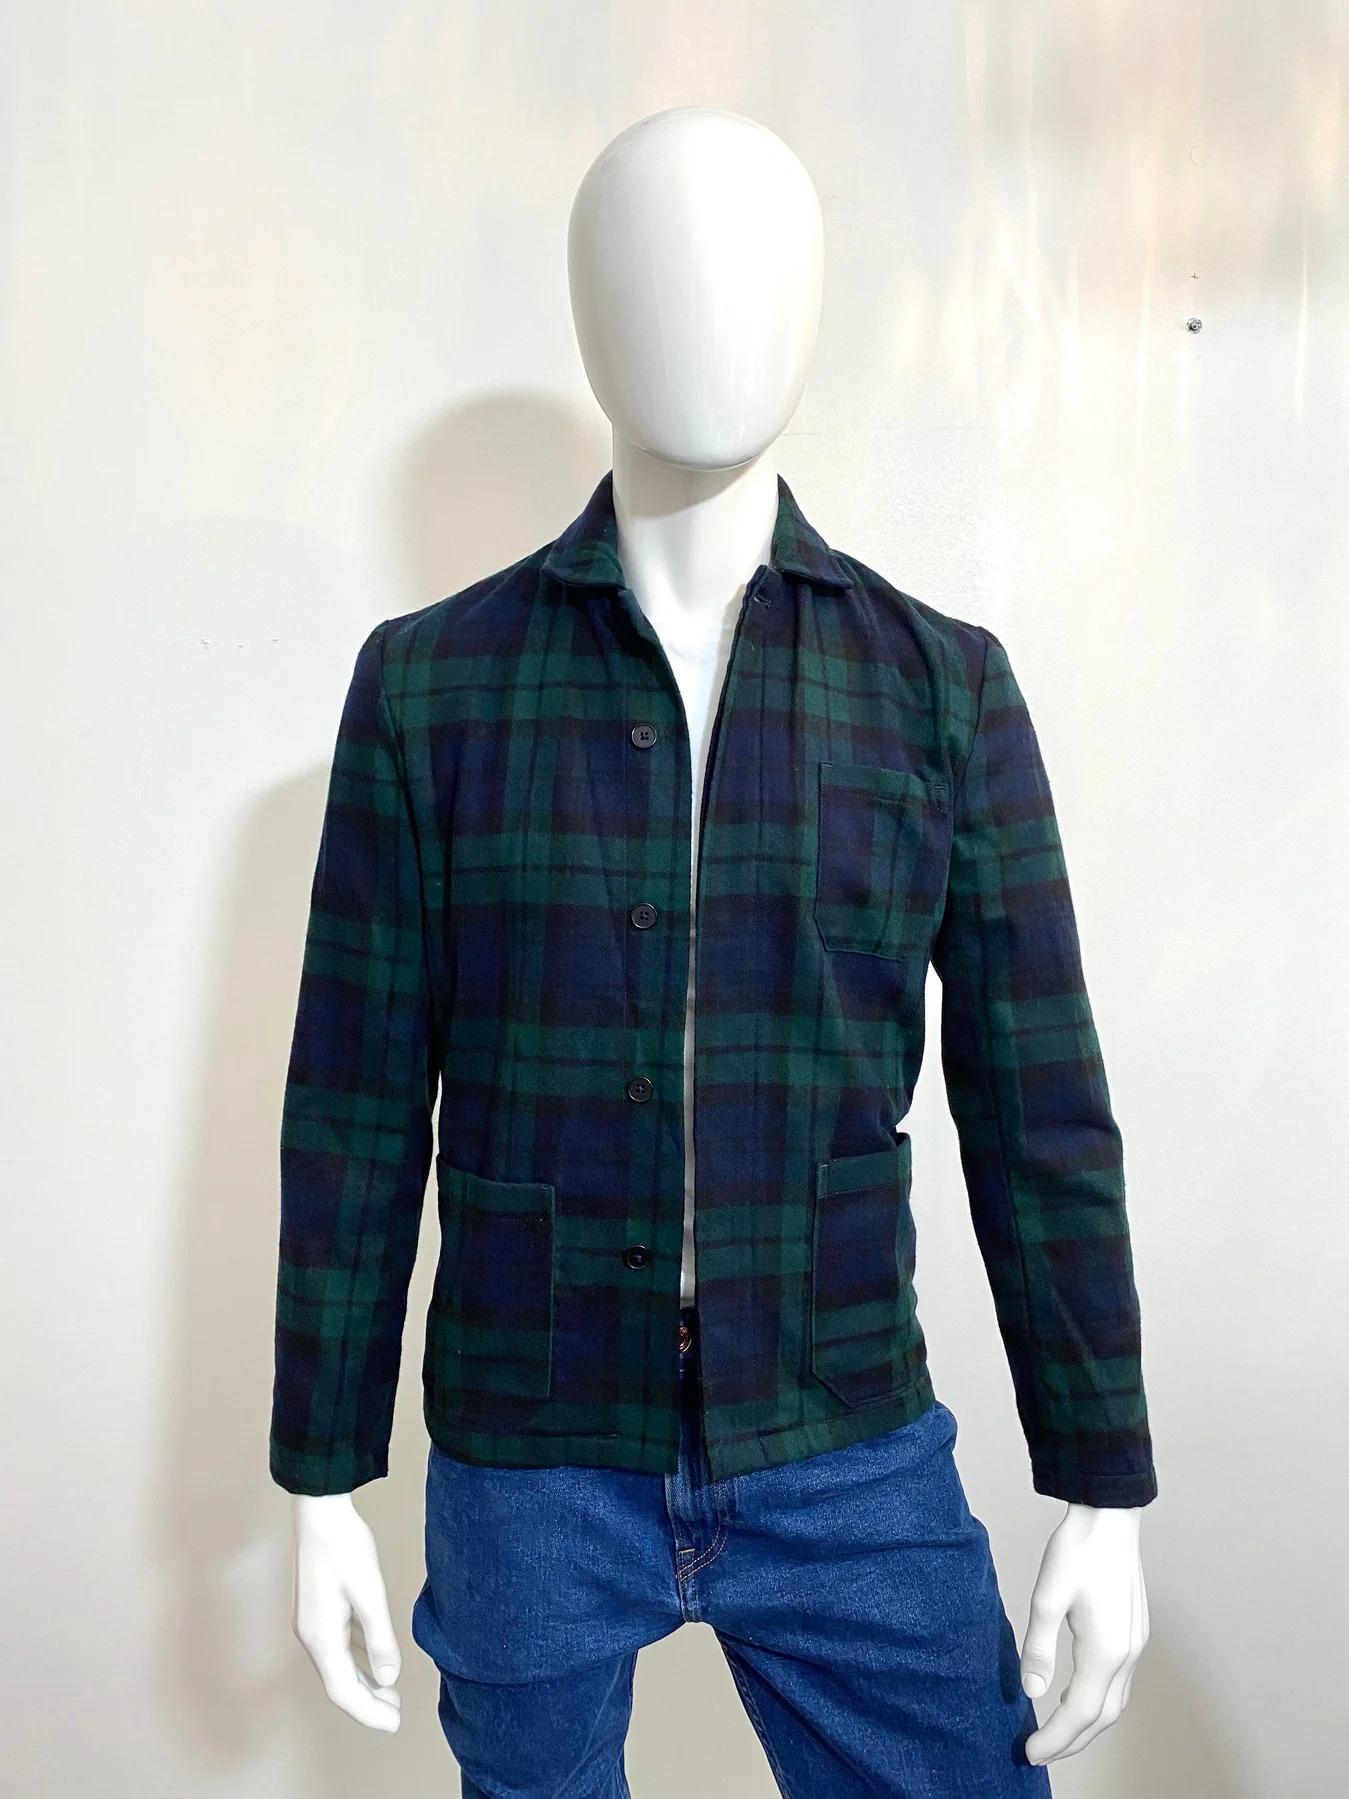 NNO7 Plaid Jacket

60% Wool in green, blue and black. One top open chest pocket and two larger waist pockets. Hidden button closure. Fully lined.

Additional information:
Size – S ( size label missing but corresponds to Small)
Condition – Very Good